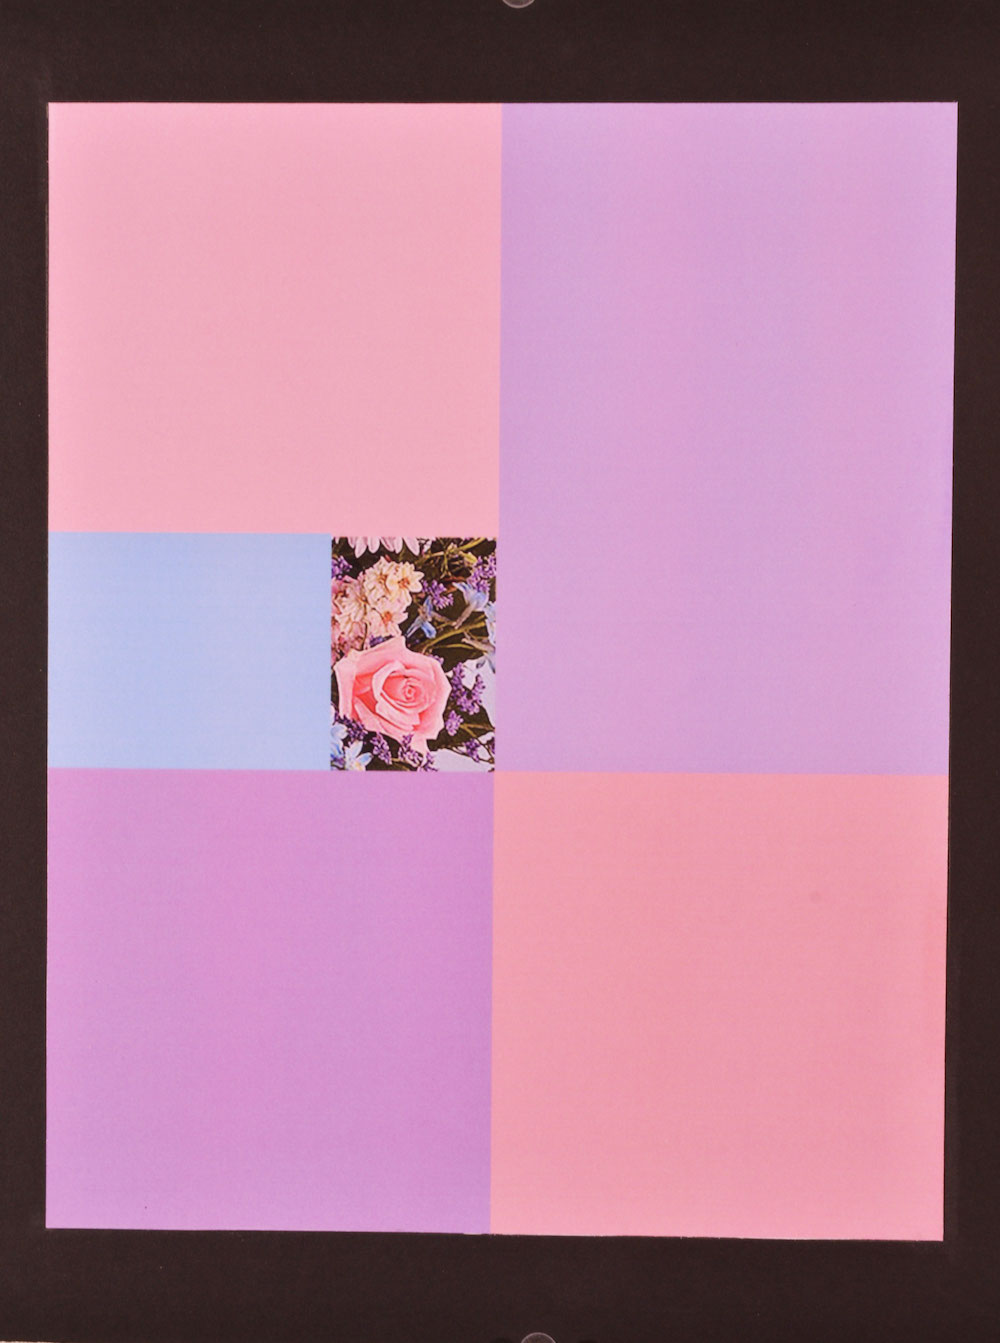 Image collage of various shades of purples, pinks, and oranges. One seciton appears to look like several flowers. 